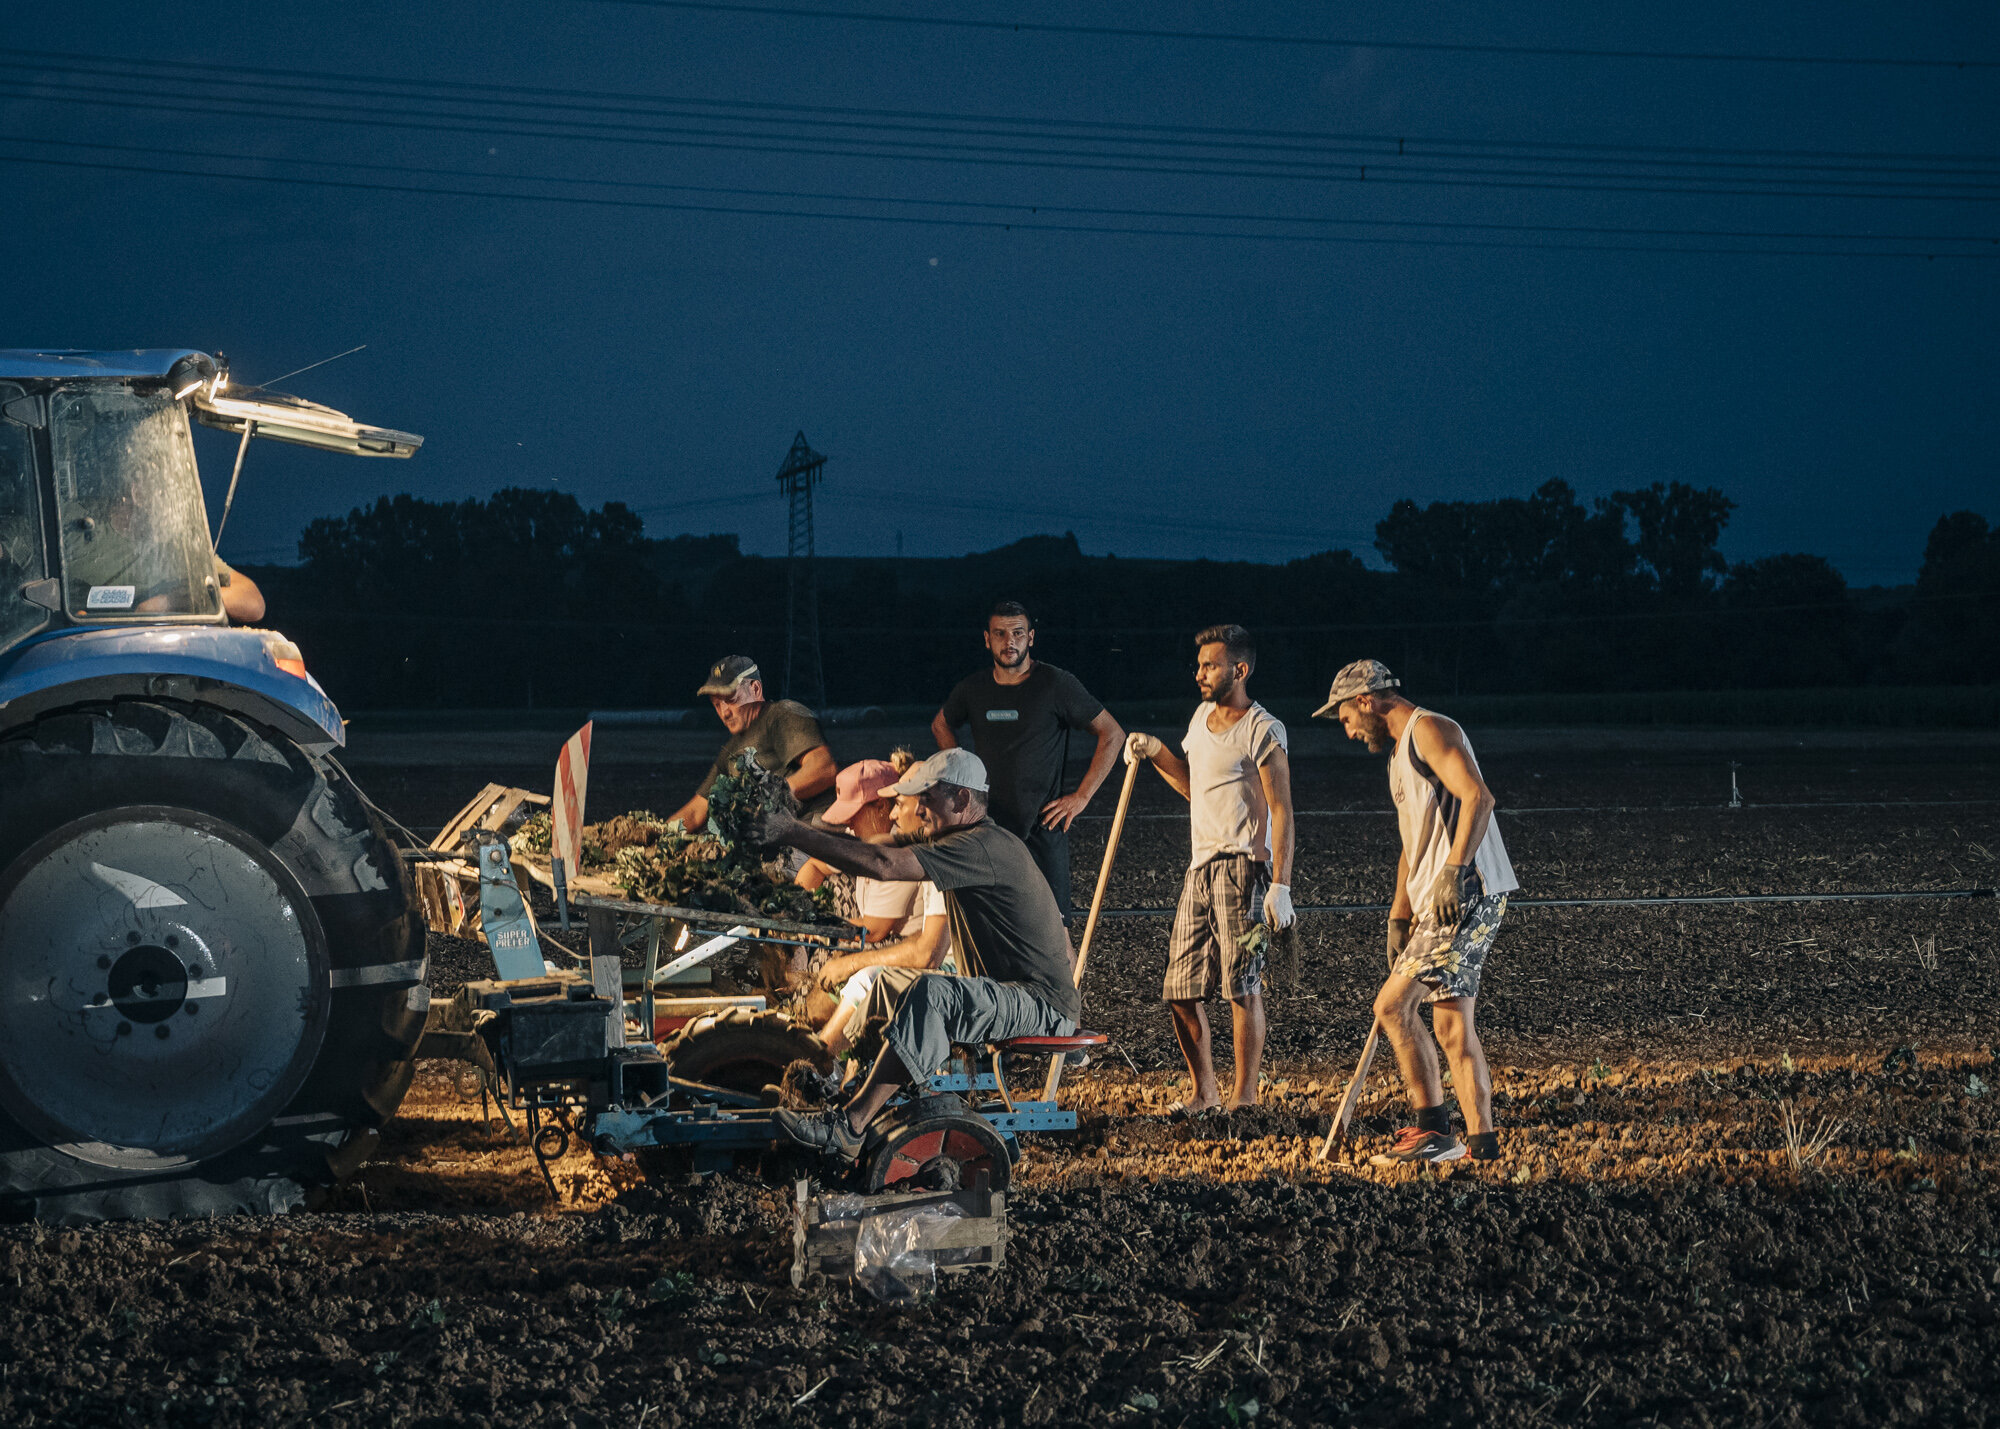  Alin, Benjamin, Attila, Flavius, Surin, Margatha and Manu from Romania are working in a field late at night, planting strawberries for the second half of the season. 